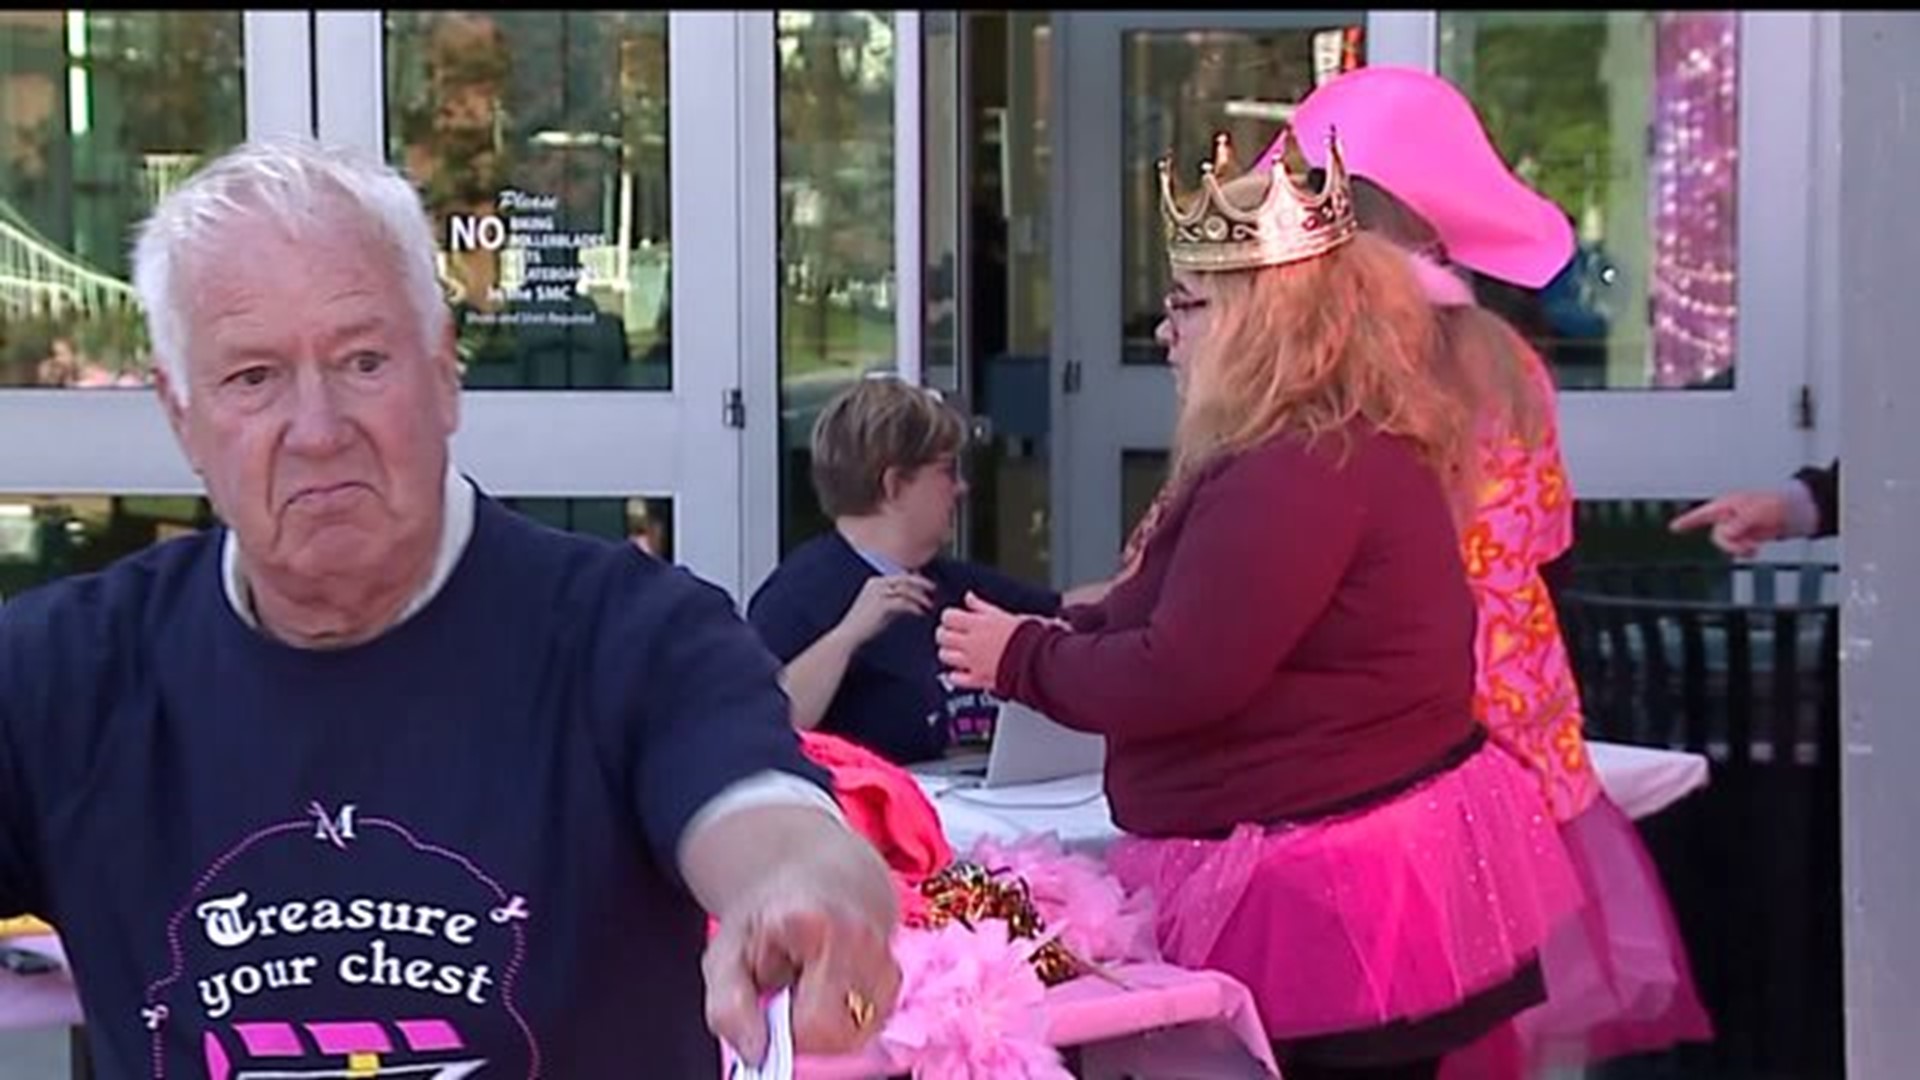 `She heroically fought breast cancer for 18 years` In memory of his sister, Lancaster County man hosts breast cancer event